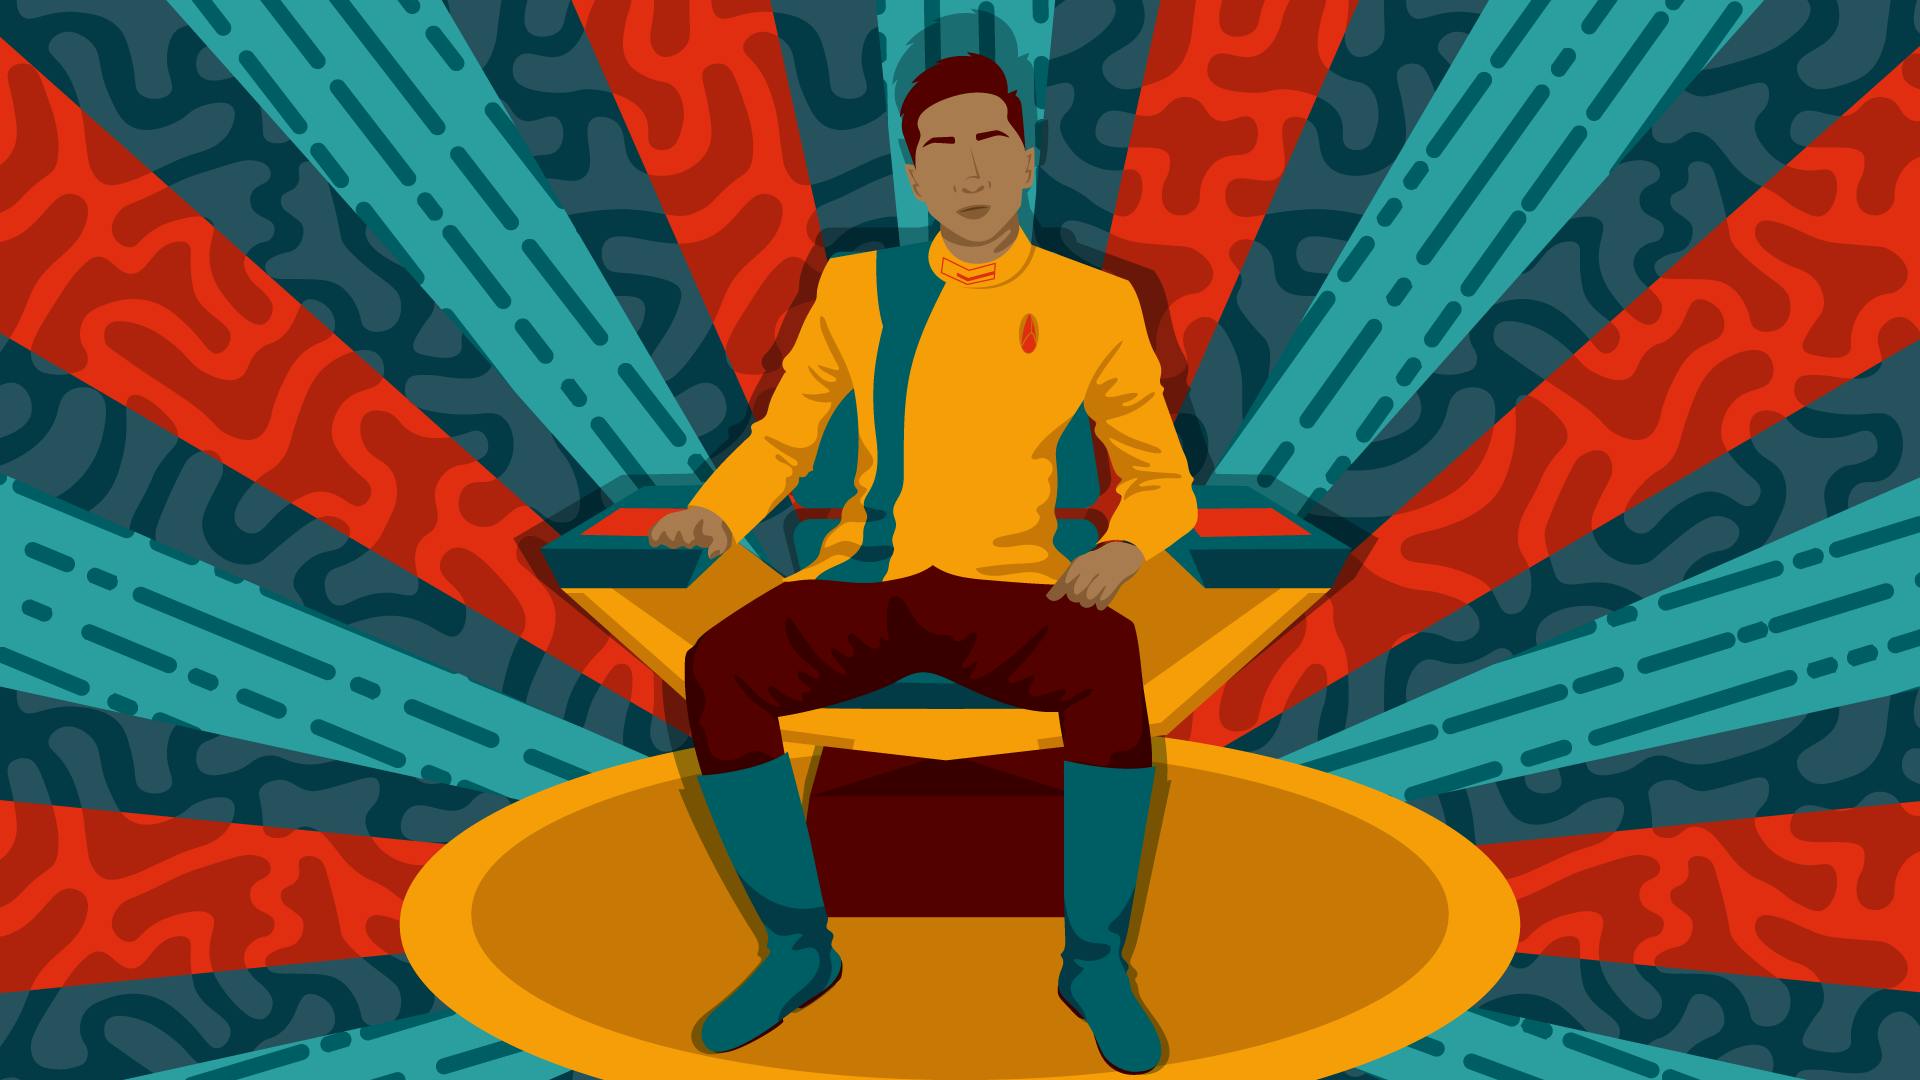 Graphic illustration of Patrick Kwok-Choon as Gen Rhys taking the center seat on Star Trek: Discovery